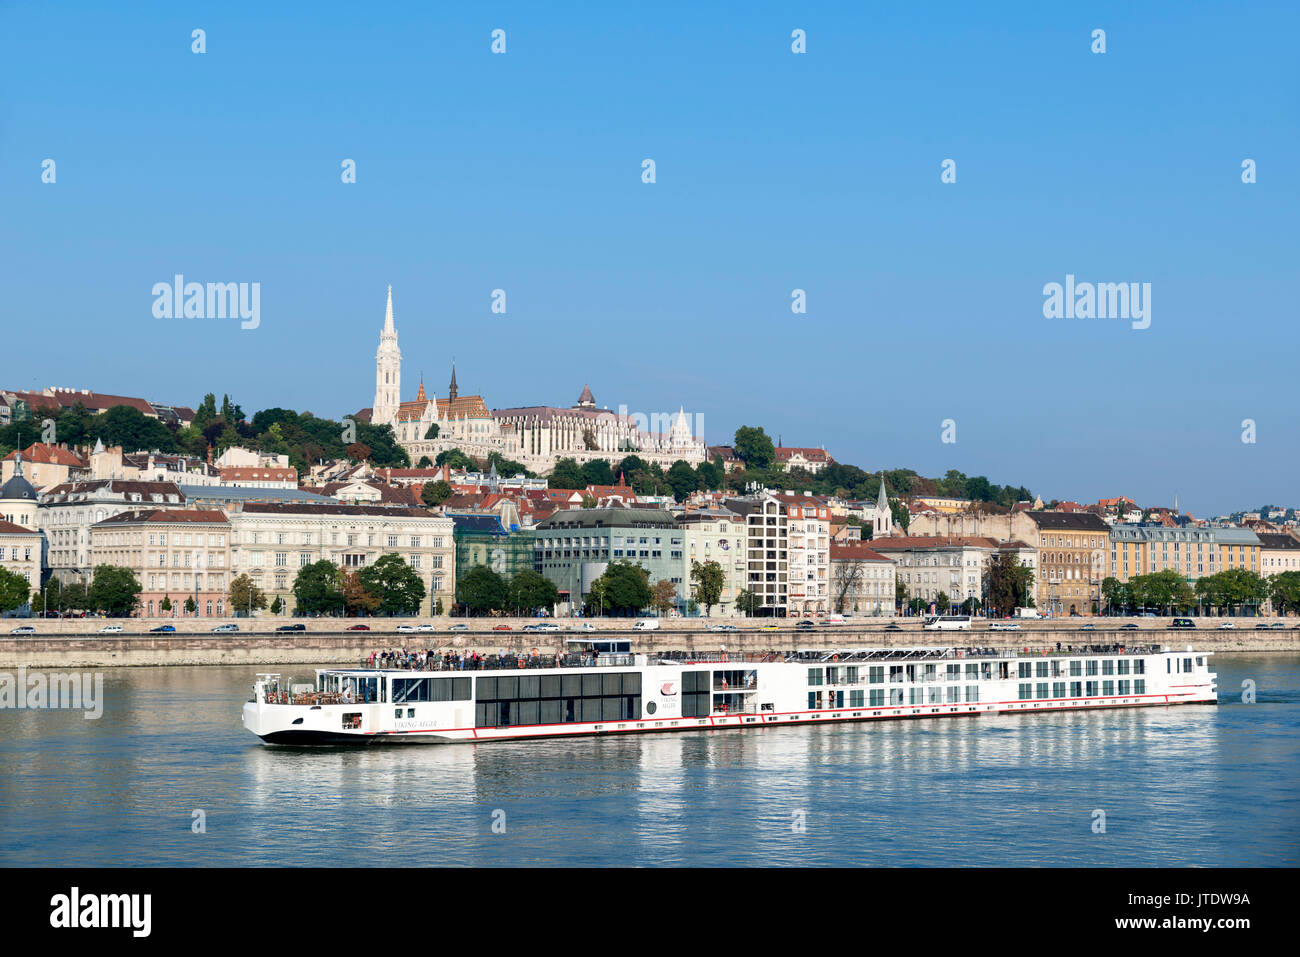 Viking River Cruises boat on the River Danube with Matthias Church and Fishermen's Bastion on Castle Hill behind, Budapest, Hungary Stock Photo